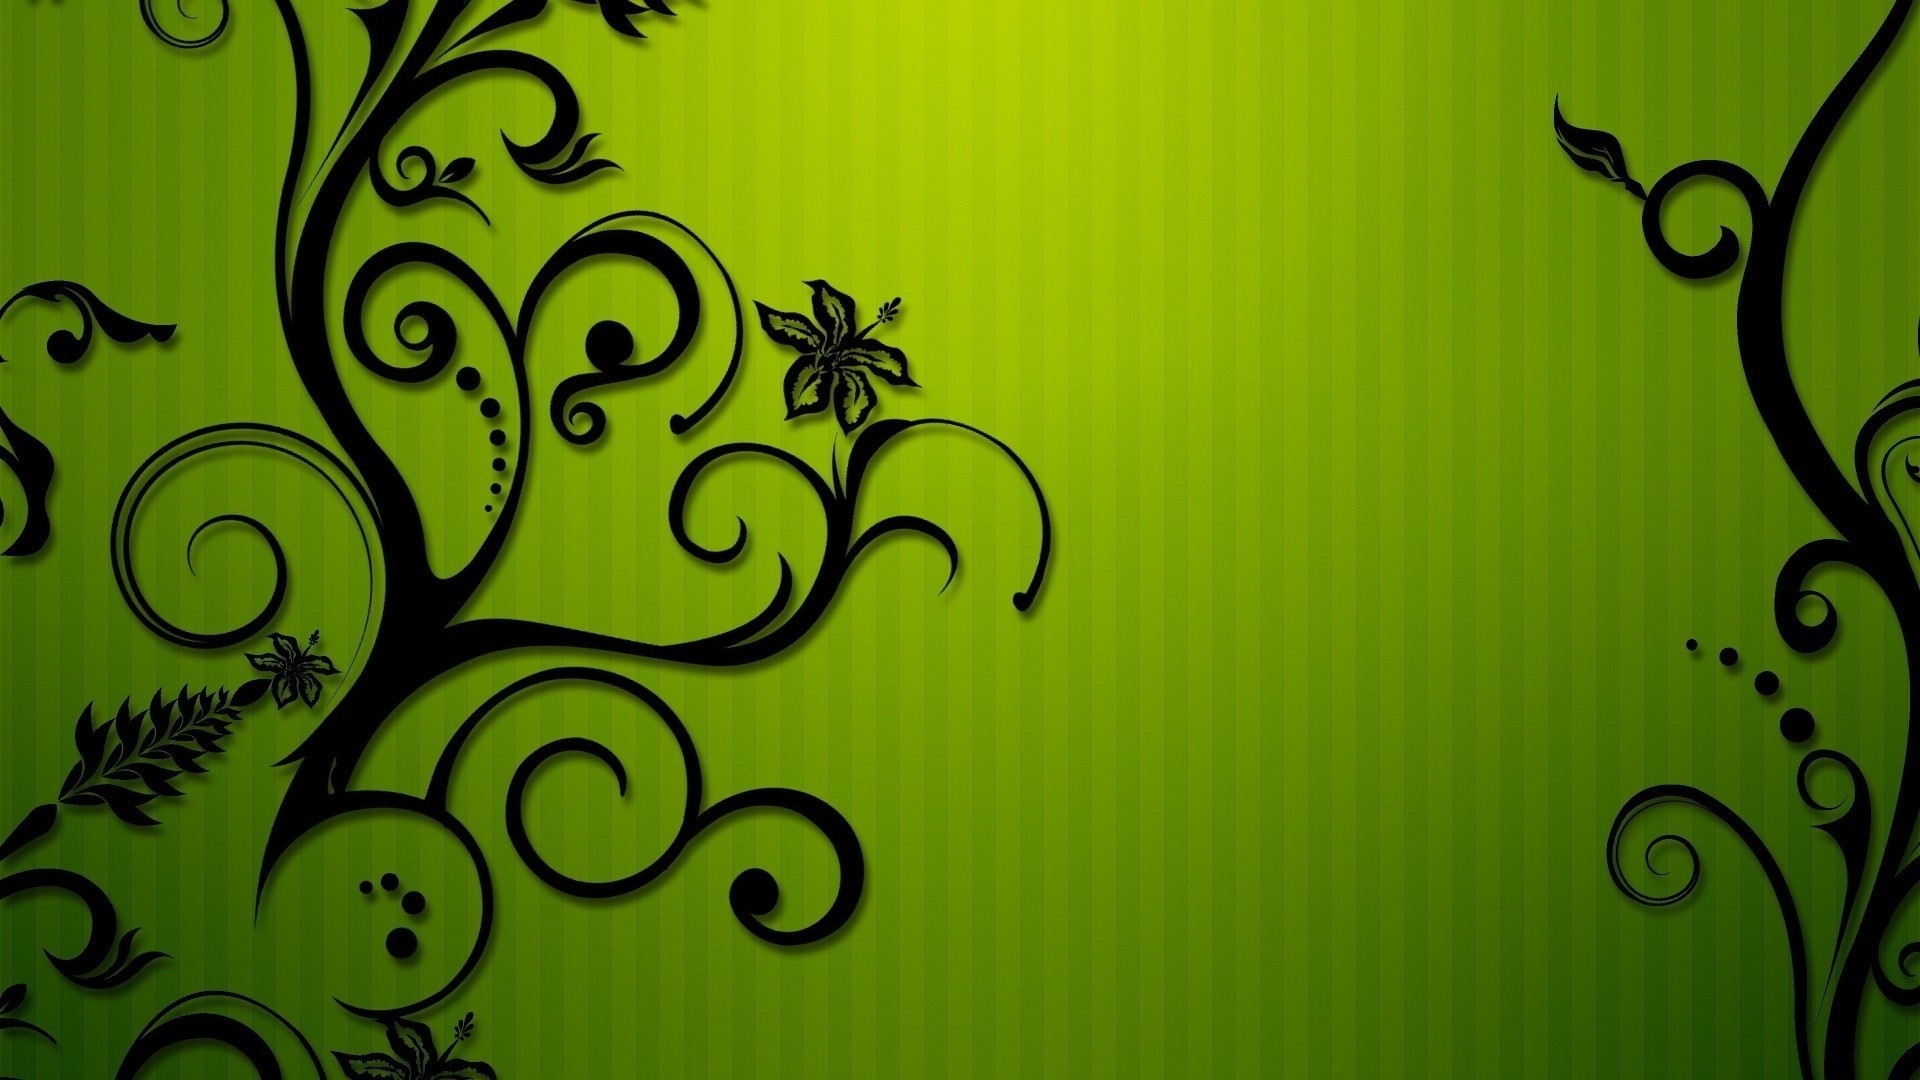 Black and Green HD Backgrounds with image resolution 1920x1080 pixel. You can make this wallpaper for your Desktop Computer Backgrounds, Mac Wallpapers, Android Lock screen or iPhone Screensavers